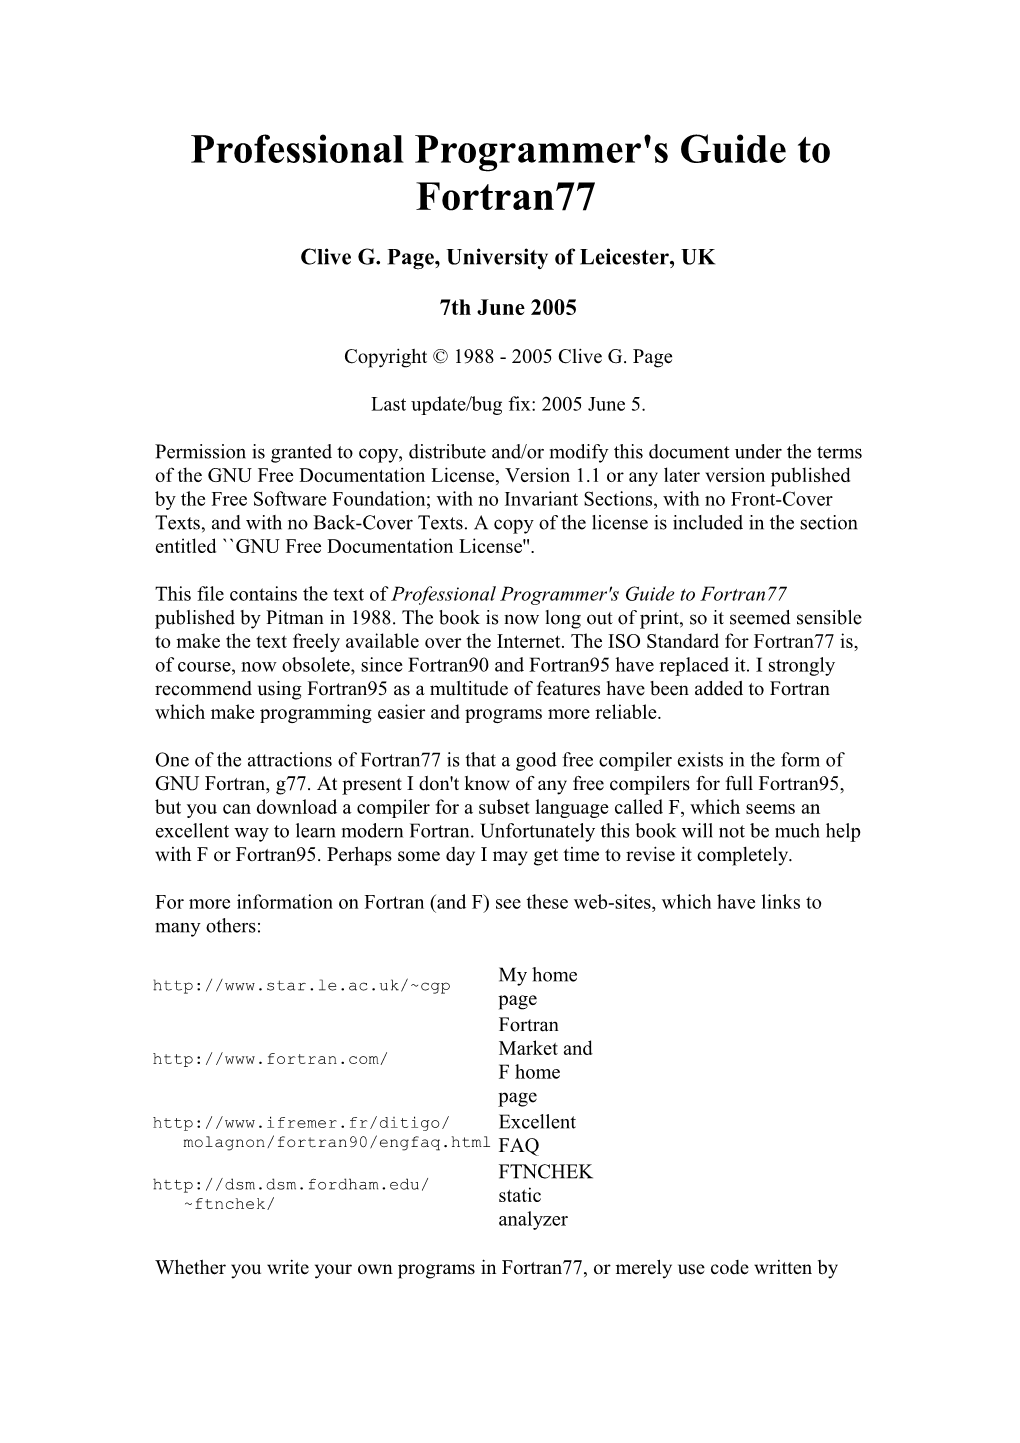 Professional Programmer's Guide to Fortran77